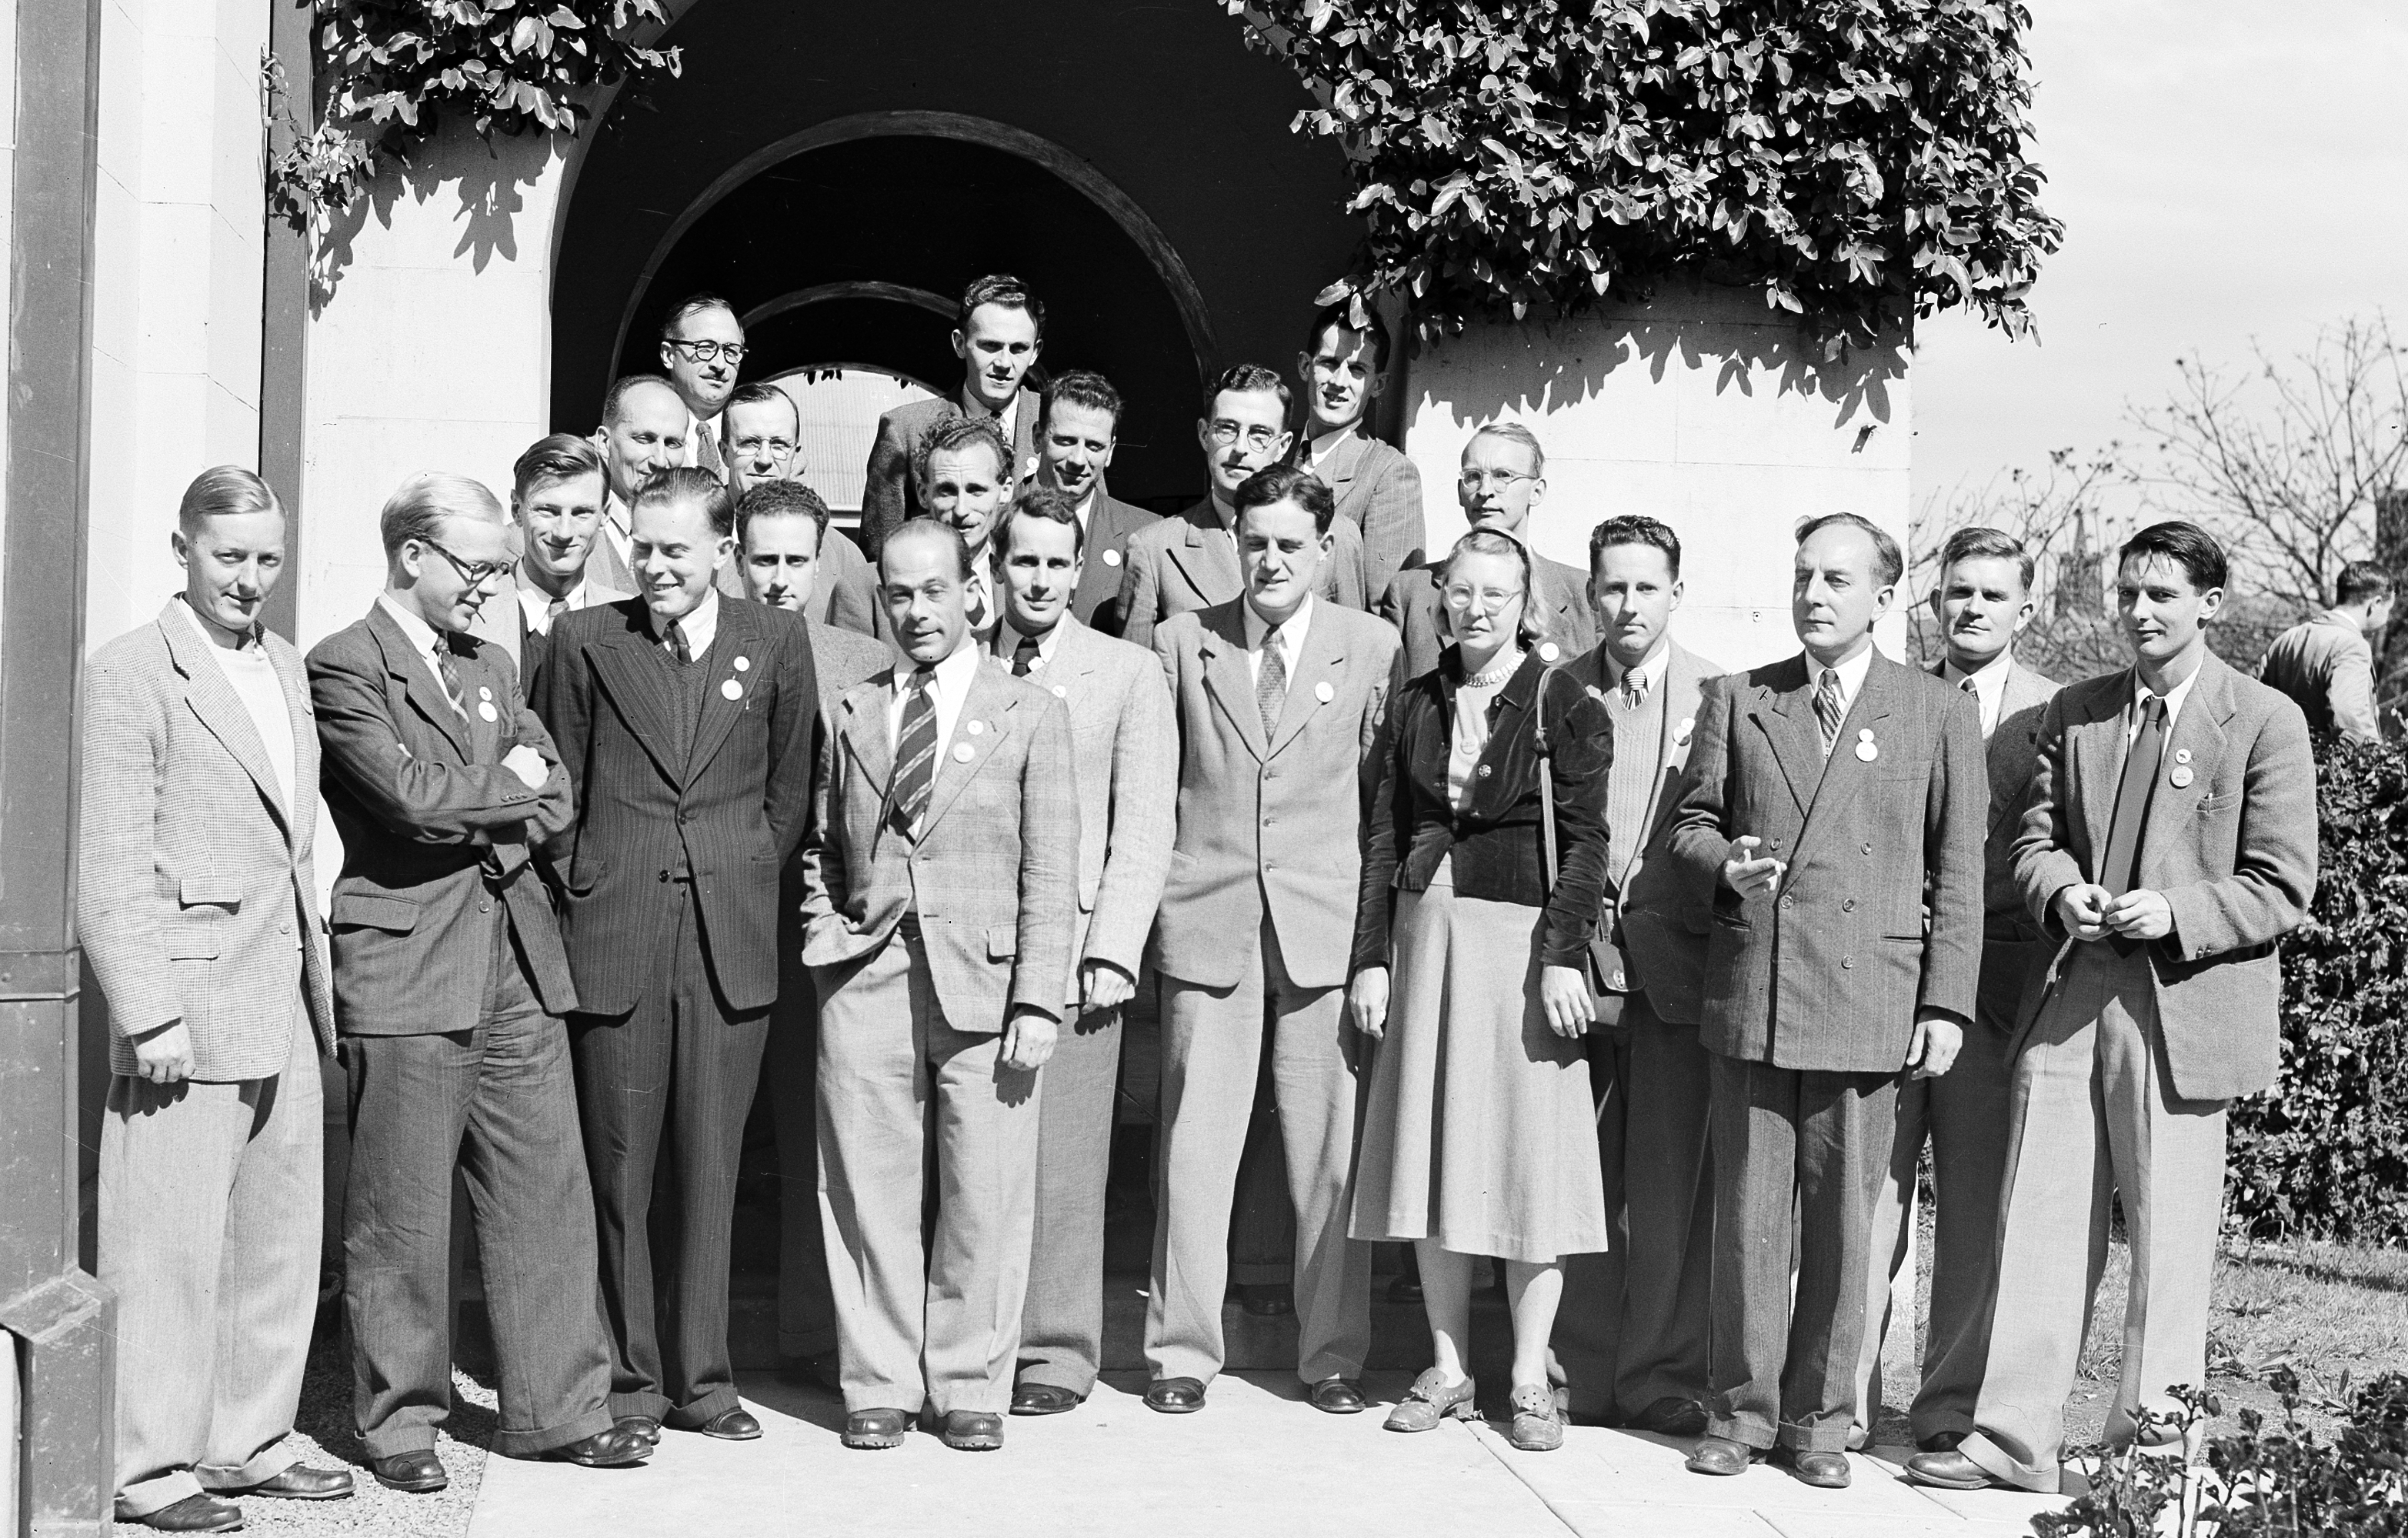 International Union of Radio Science conference at the University of Sydney, photo likely taken 11 August 1952. Front row: Ruby Payne-Scott. Image source: Jessica Chapman